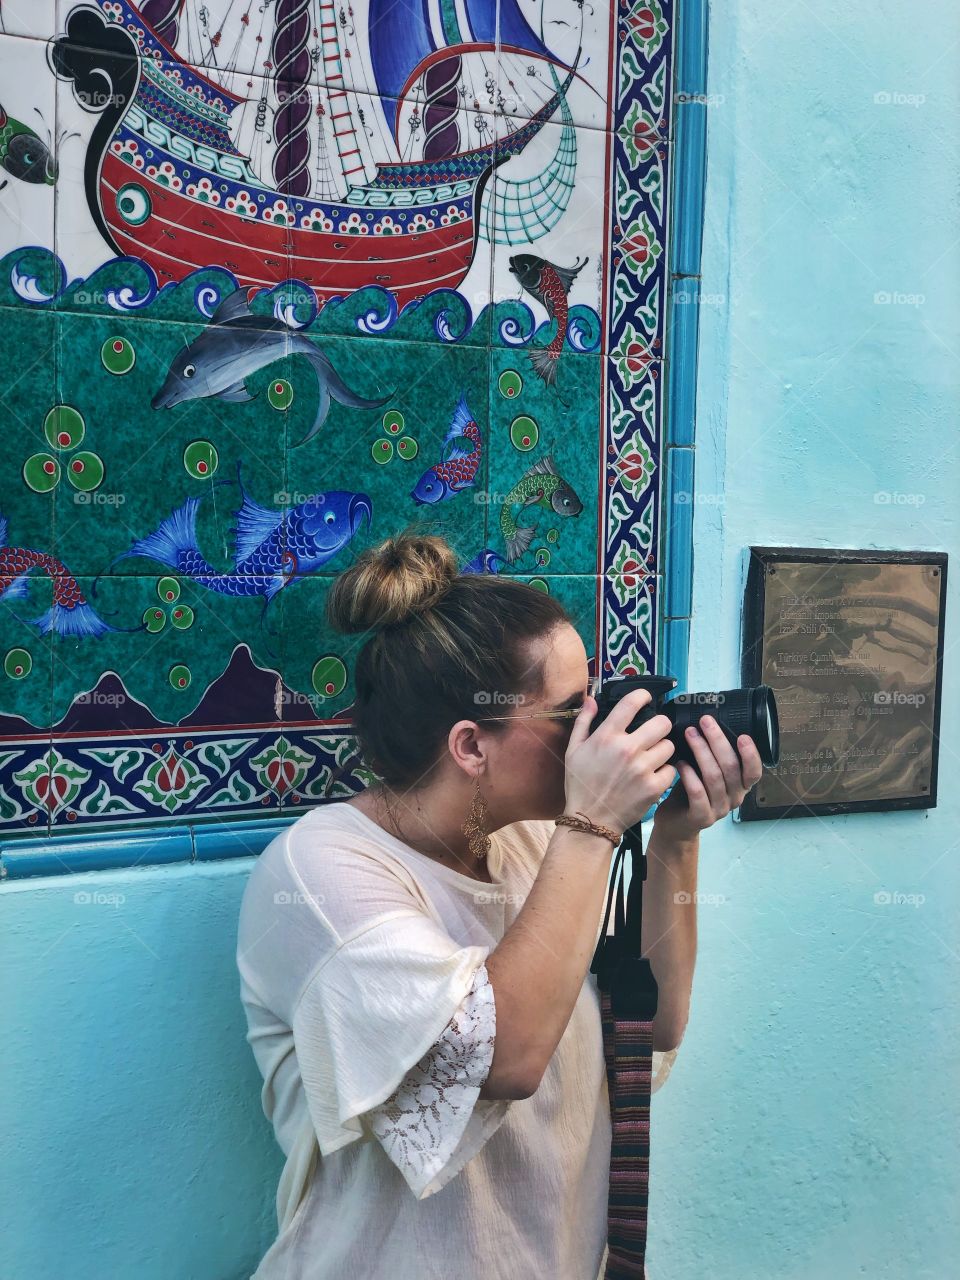 Take in everything you can, however you can. Loved the colors and mosaics we found all over Cuba!